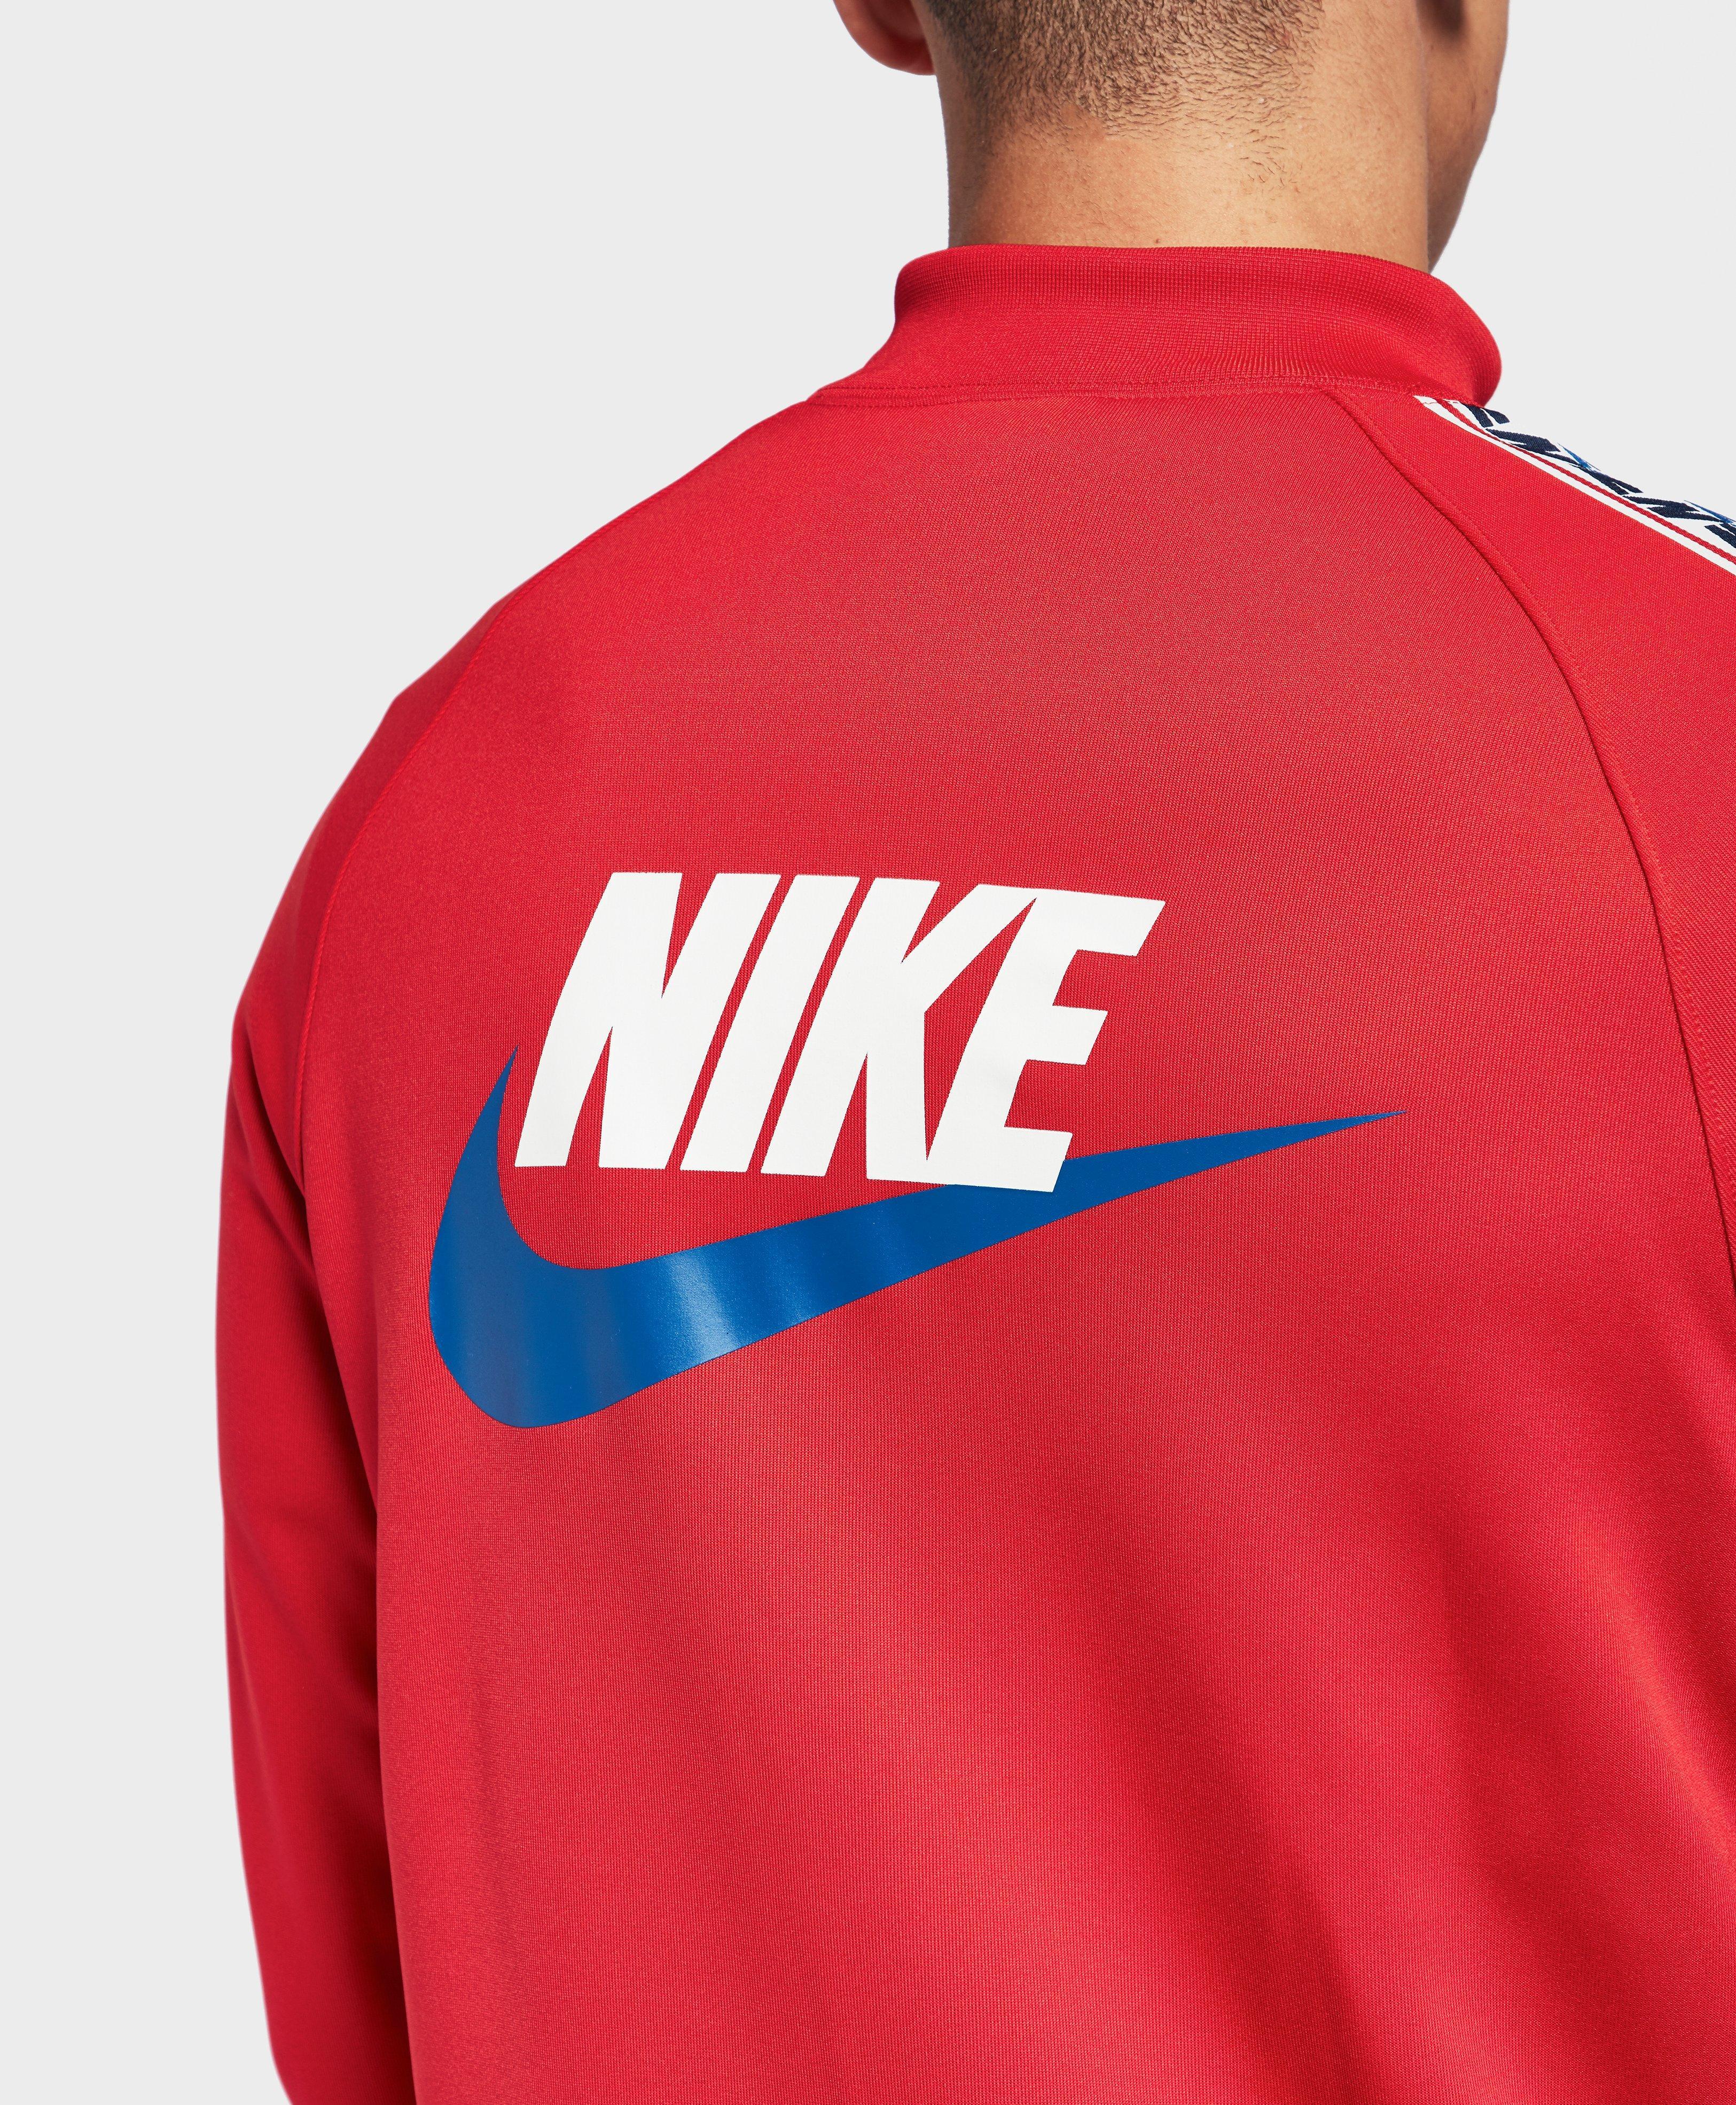 nike arch taped track top